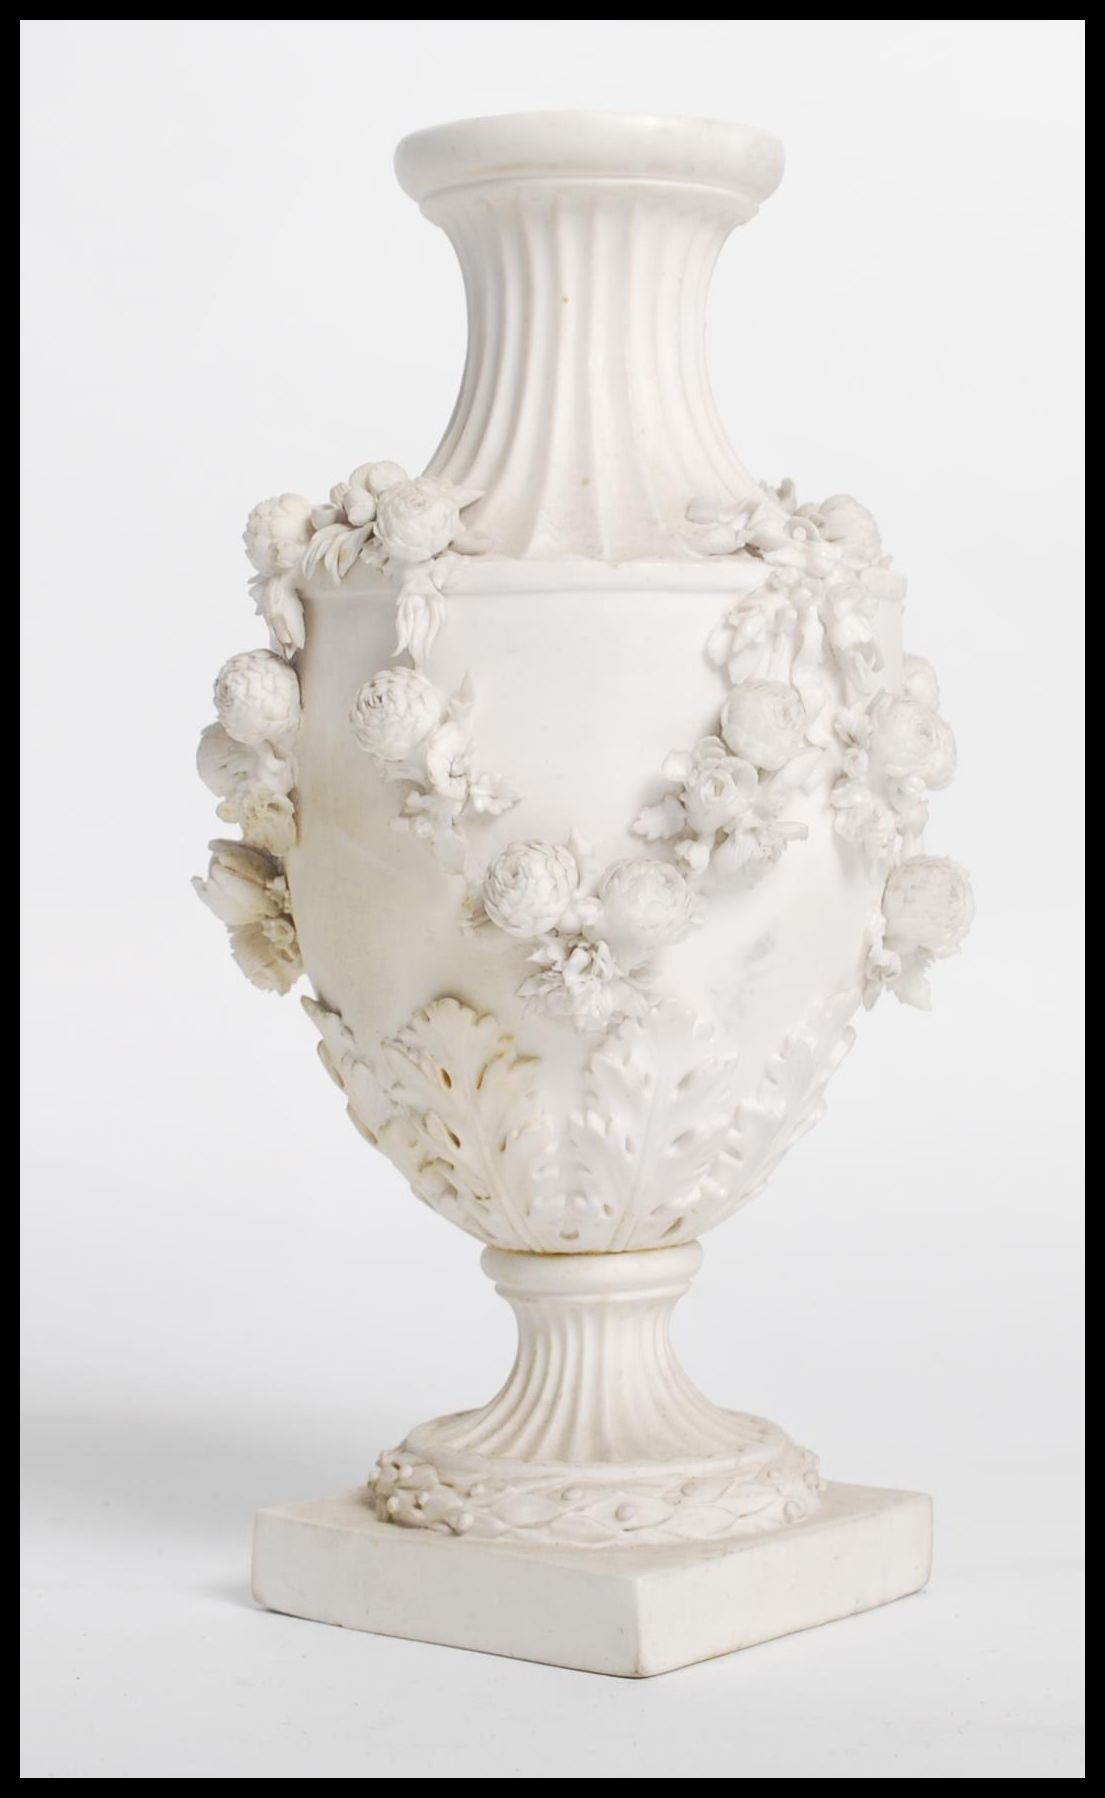 A 19th century Derby parian bisque ware vase raised on a square base with relief decoration of